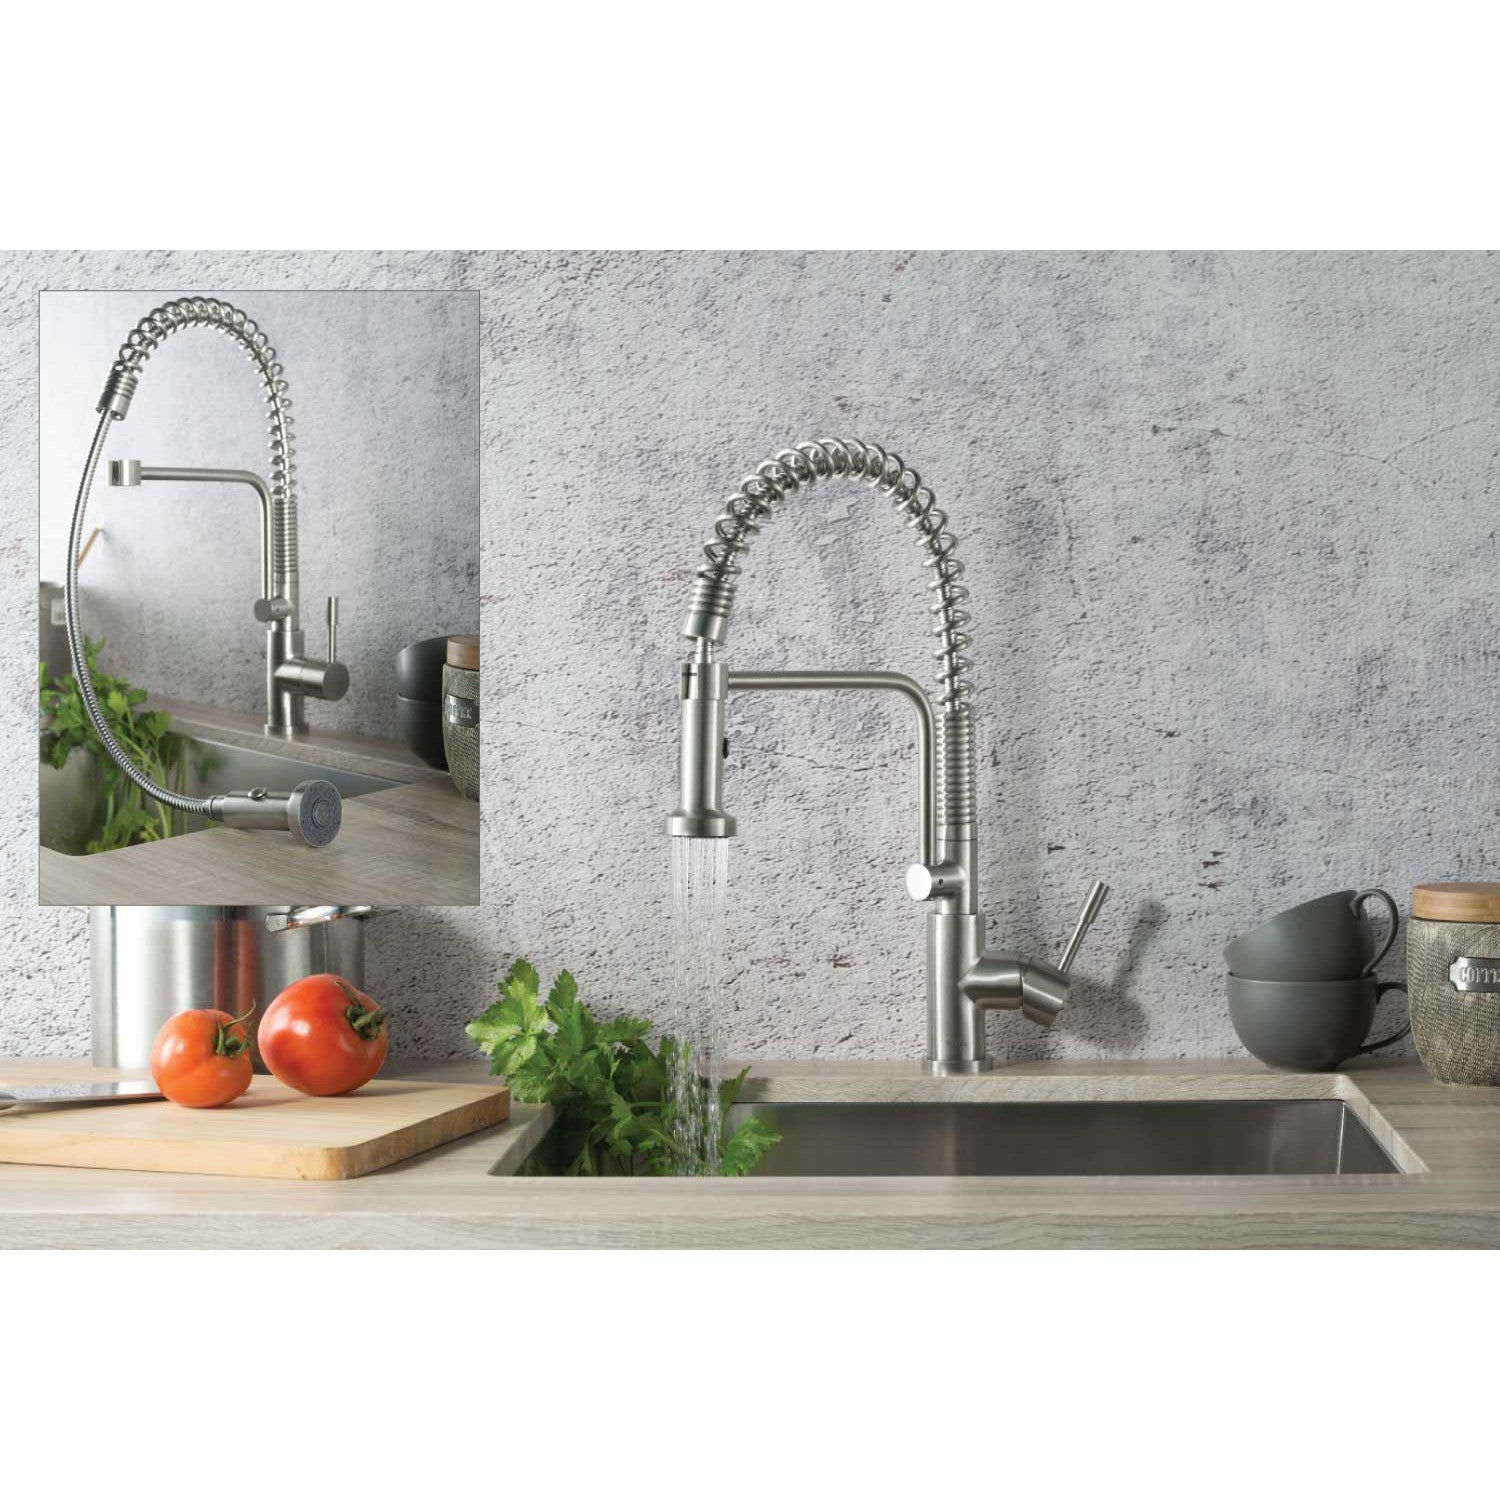 Isenberg Klassiker Caso 19" Single Hole Leaf Green Semi-Professional Stainless Steel Pull-Down Kitchen Faucet With Dual Function Sprayer